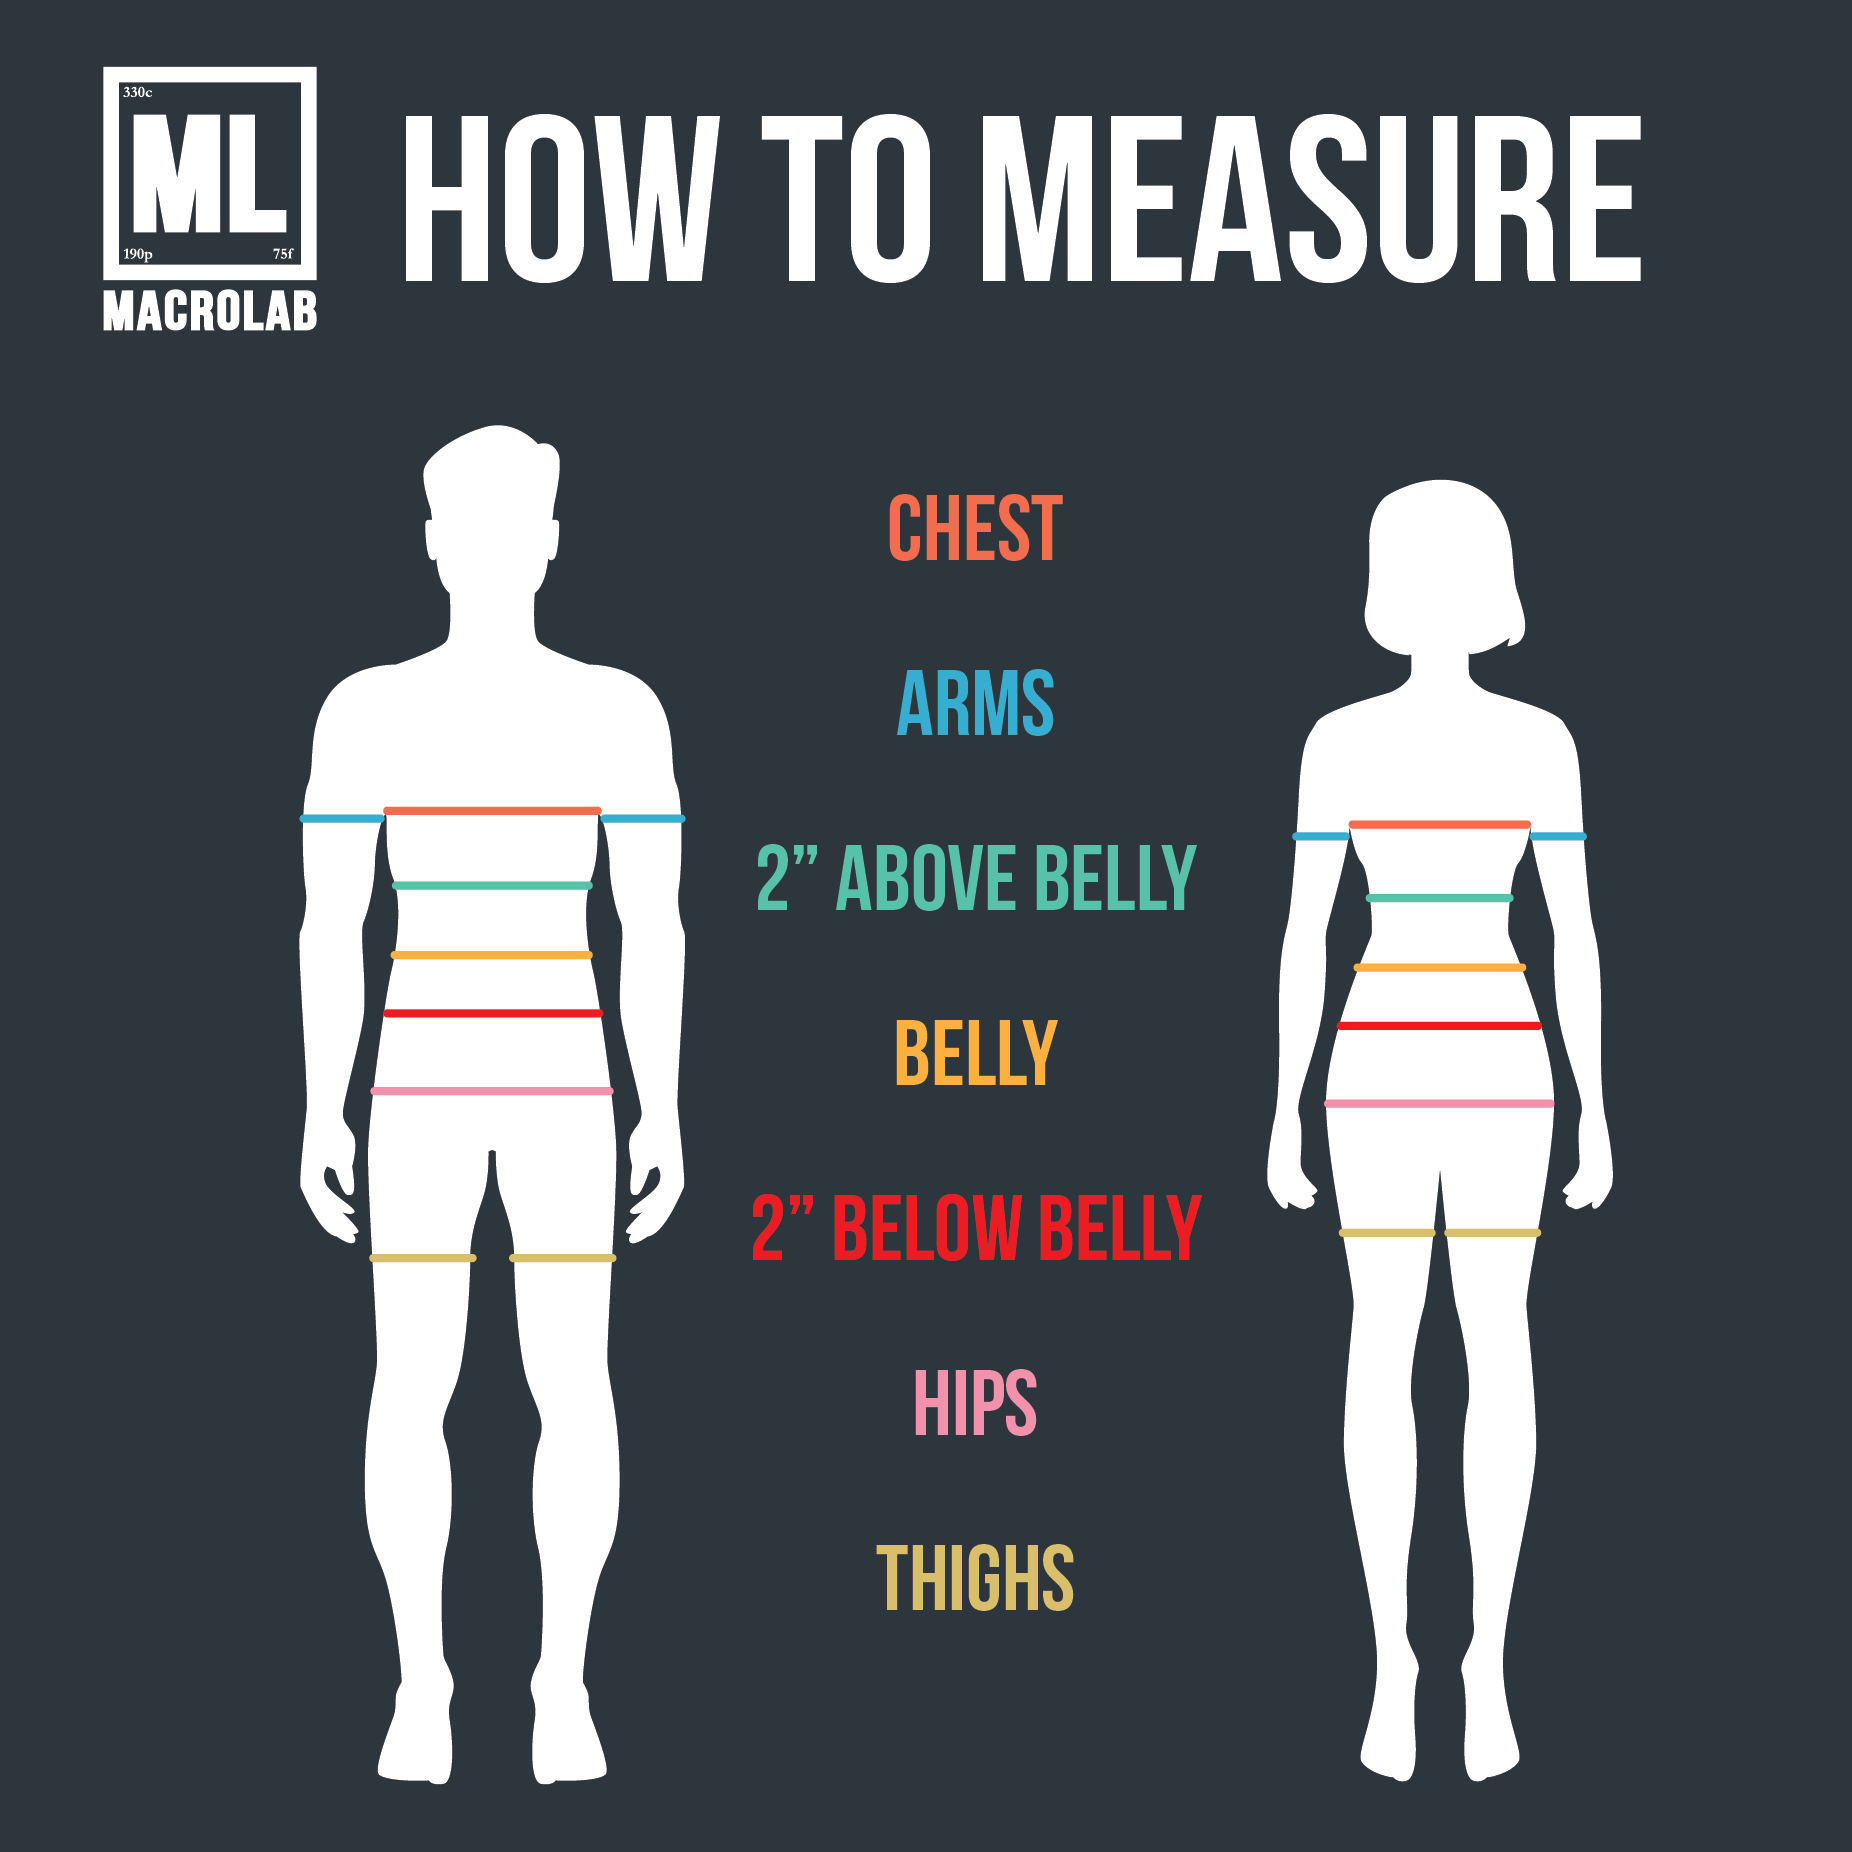 https://macrolab.com/wp-content/uploads/2020/01/how-to-properly-take-body-measurements.png